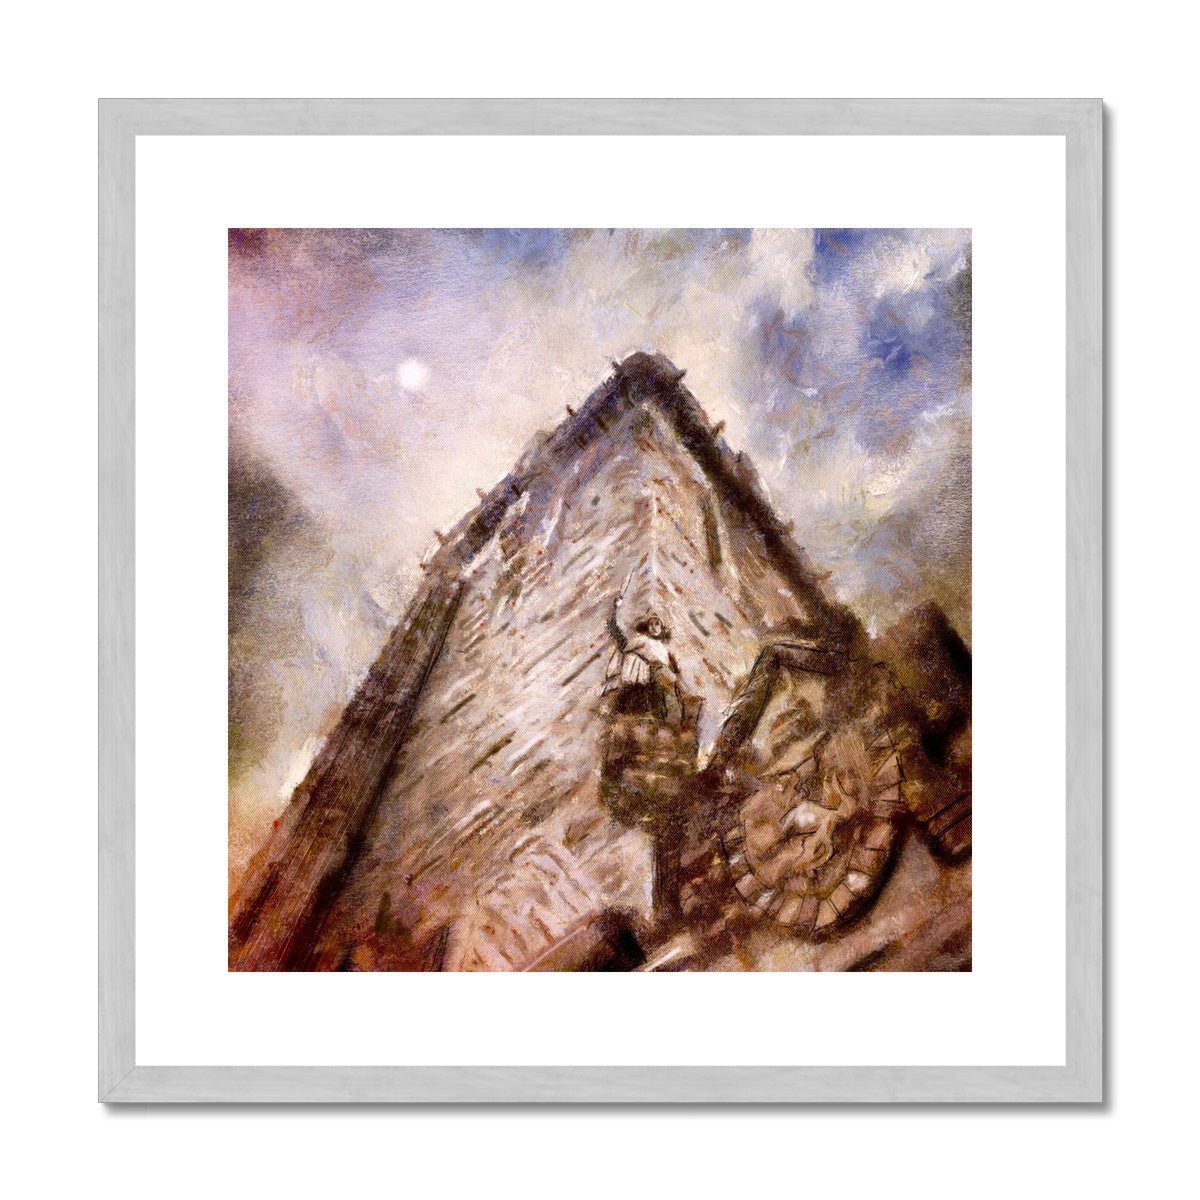 Wallace Monument Moonlight Painting | Antique Framed & Mounted Prints From Scotland-Antique Framed & Mounted Prints-Historic & Iconic Scotland Art Gallery-20"x20"-Silver Frame-Paintings, Prints, Homeware, Art Gifts From Scotland By Scottish Artist Kevin Hunter